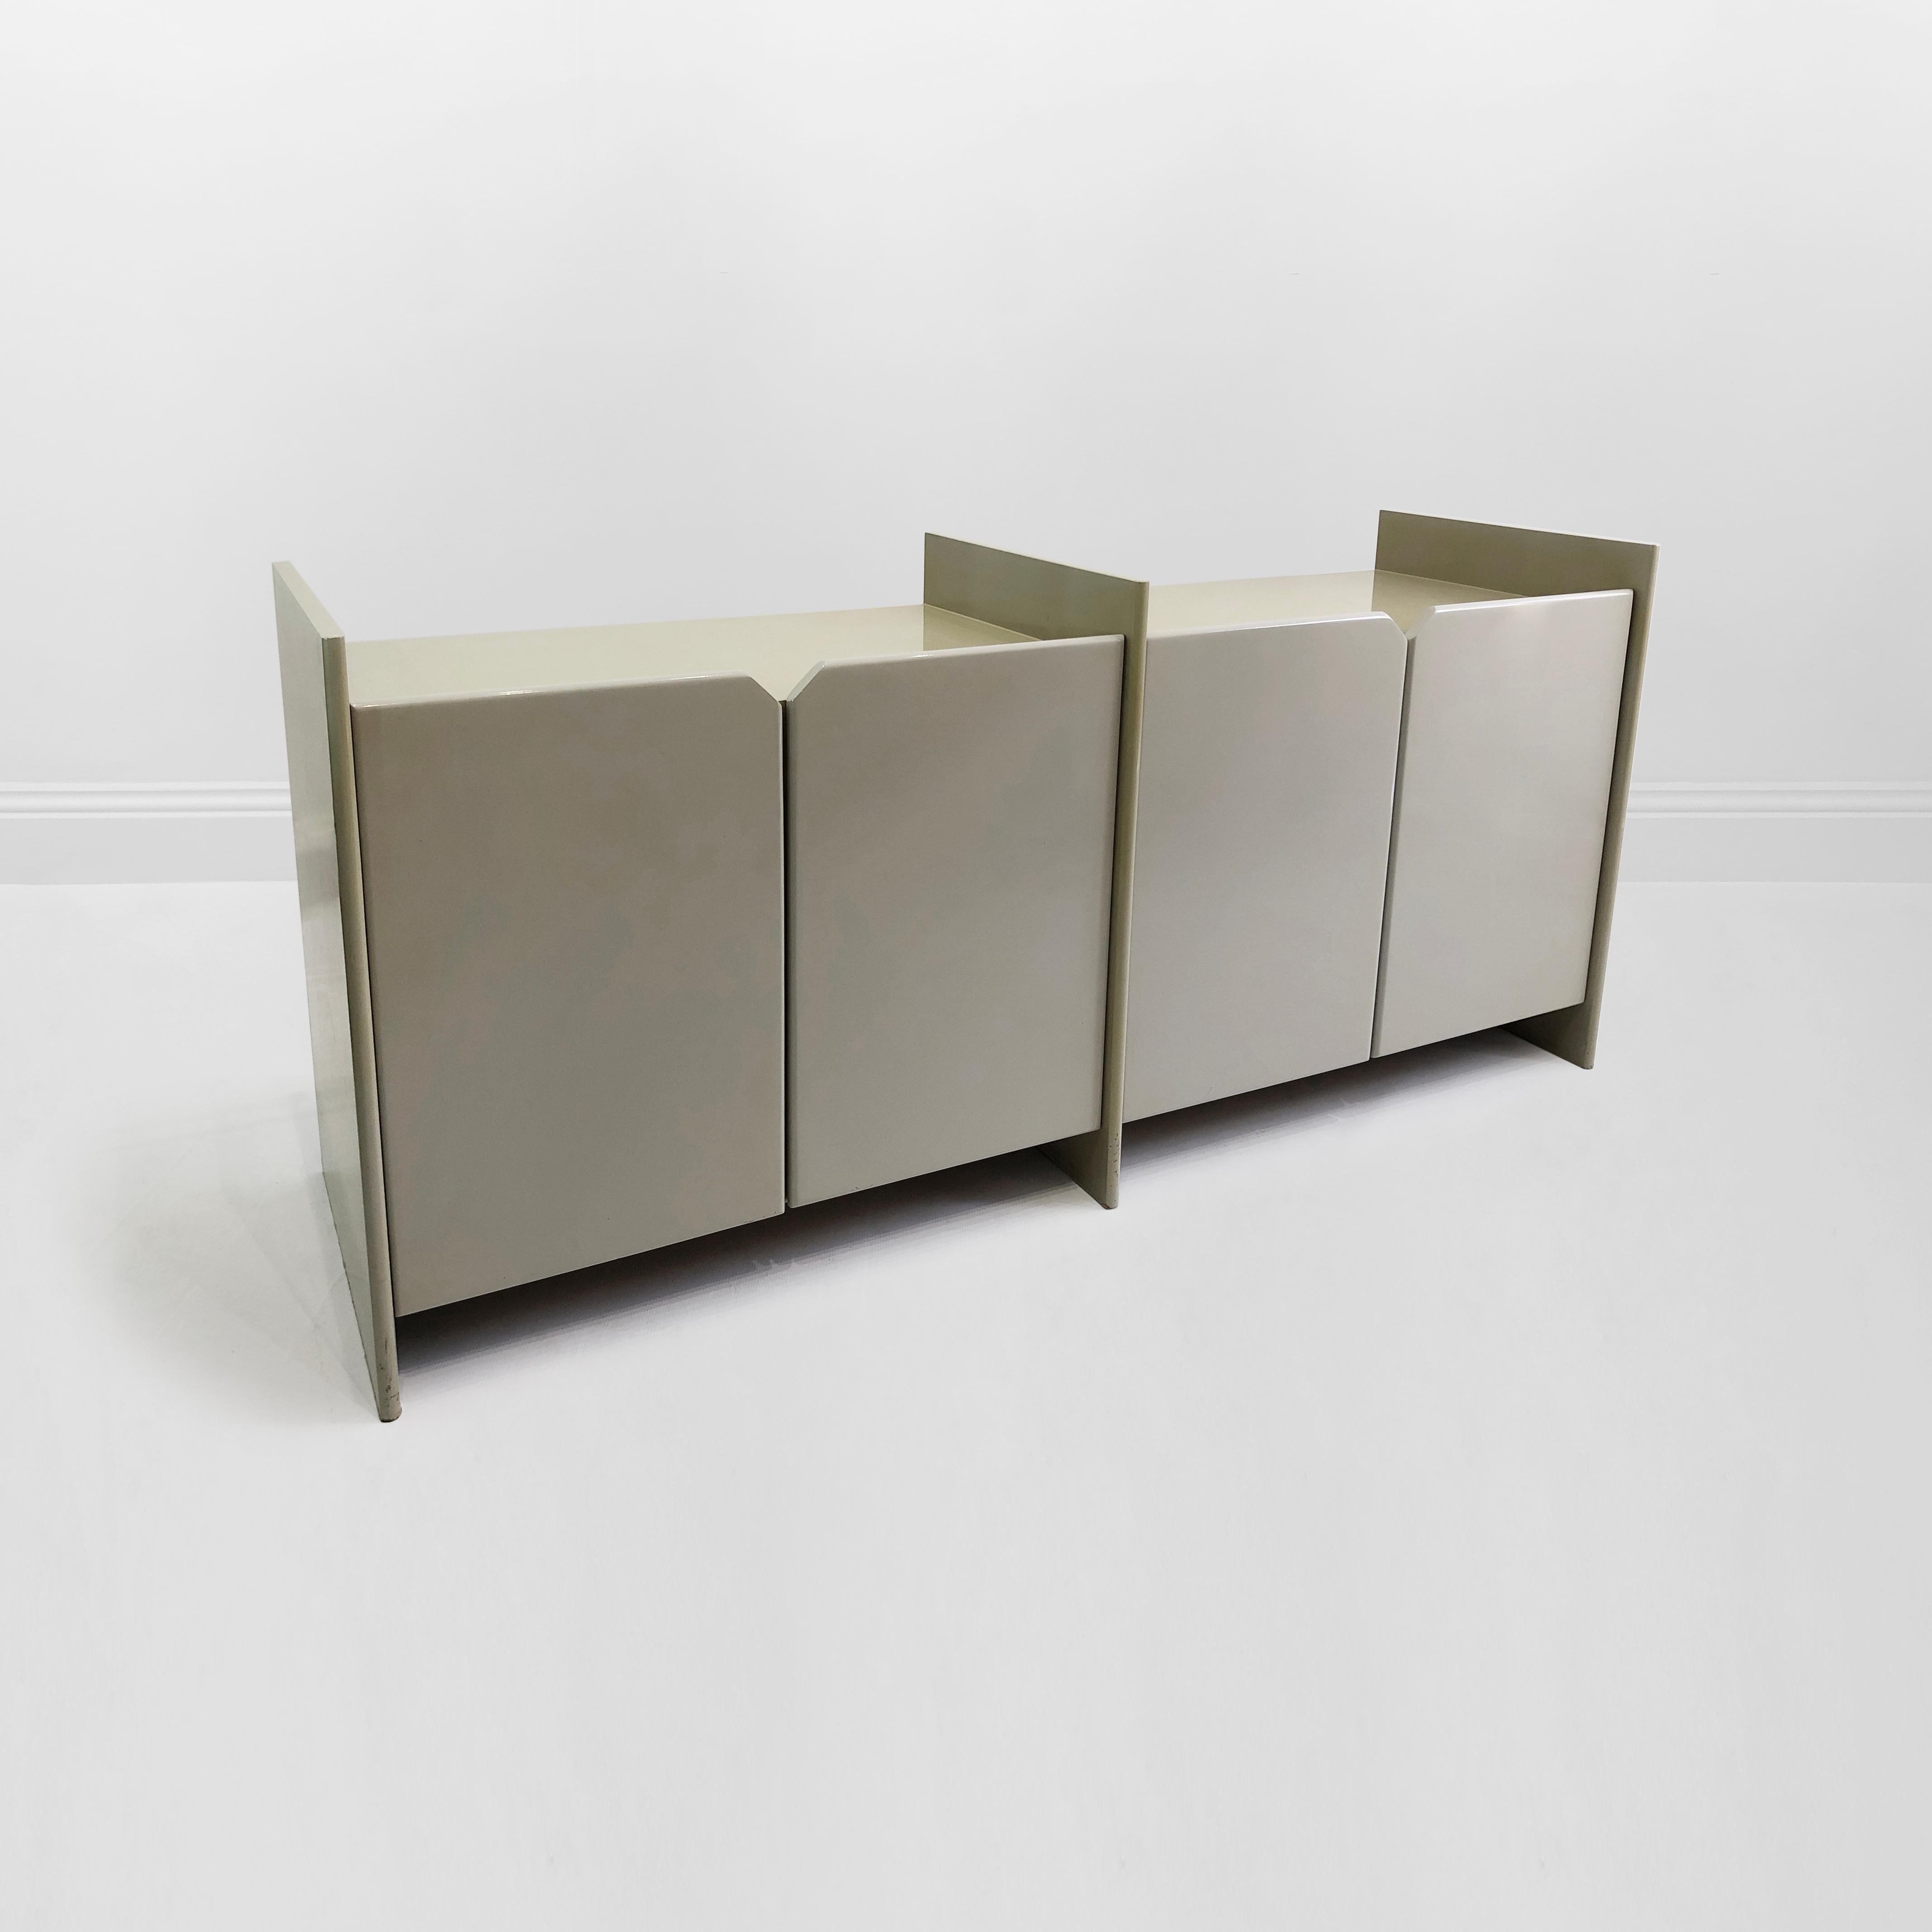 Powder-Coated Postmodern 1980s Memphis Lacquered Sideboard Italian Vintage Italian Cabinet For Sale